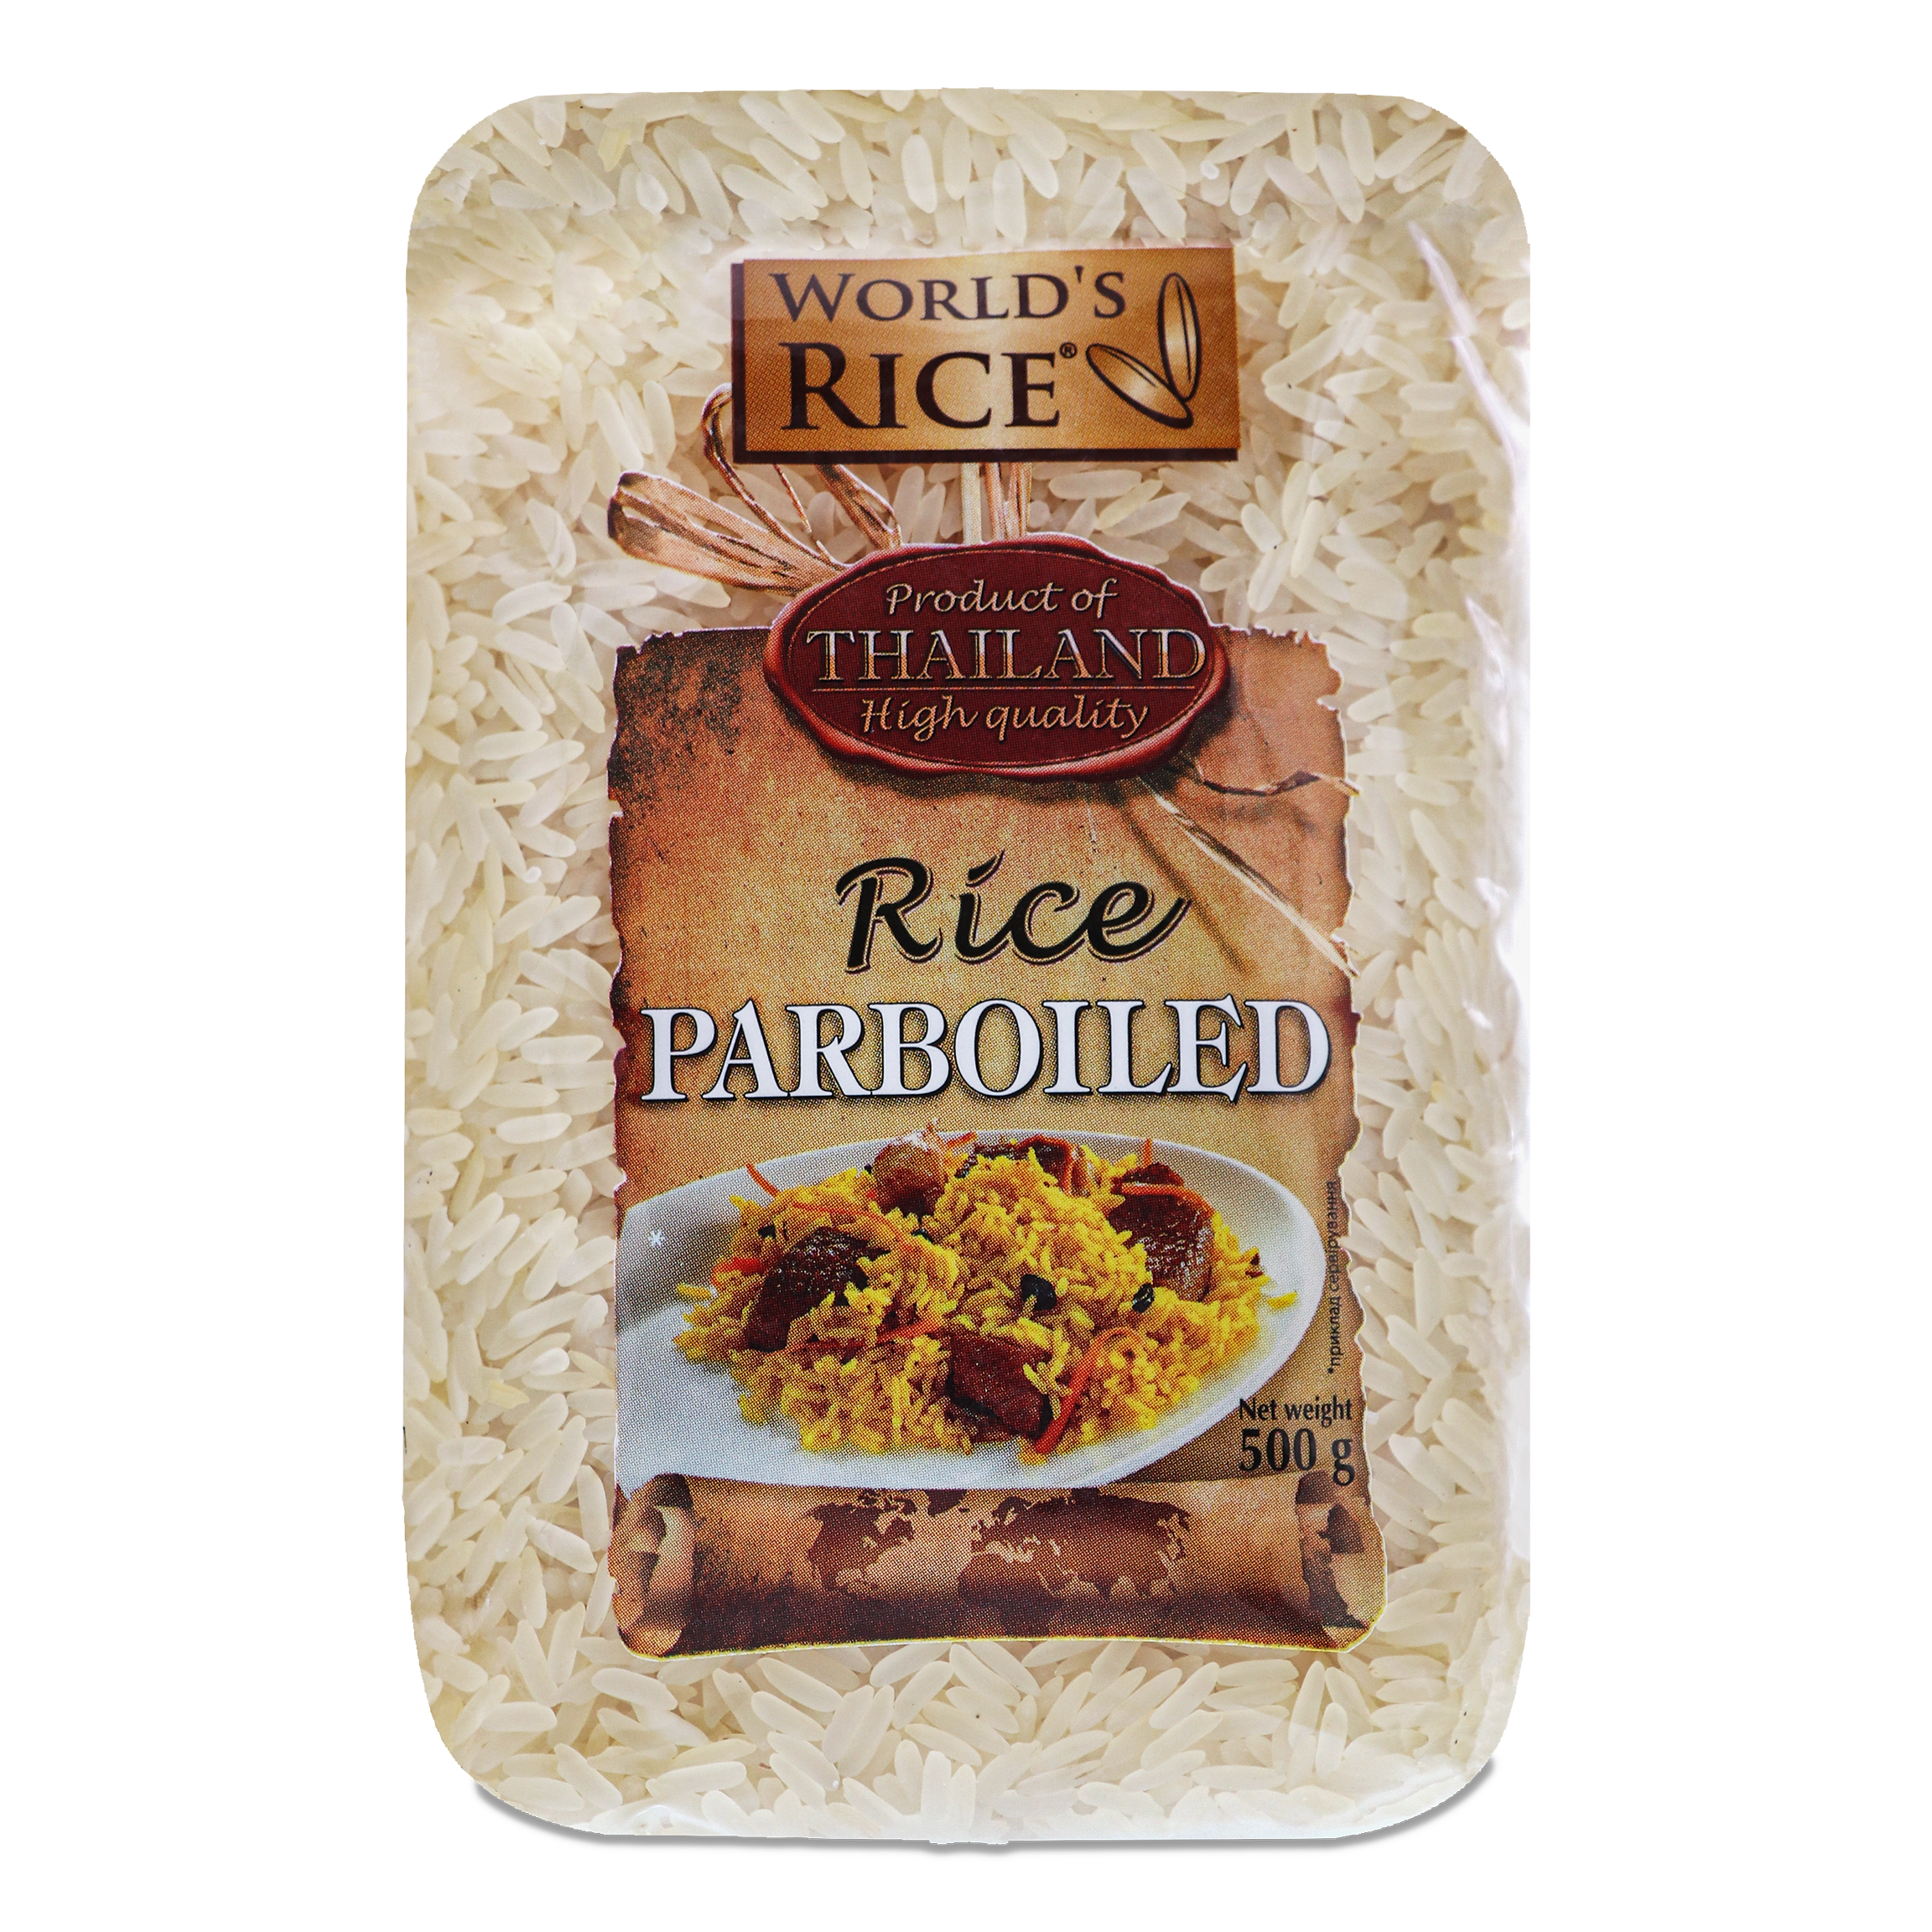 World's Rice Long-grain Parboiled Polished Rice 500g